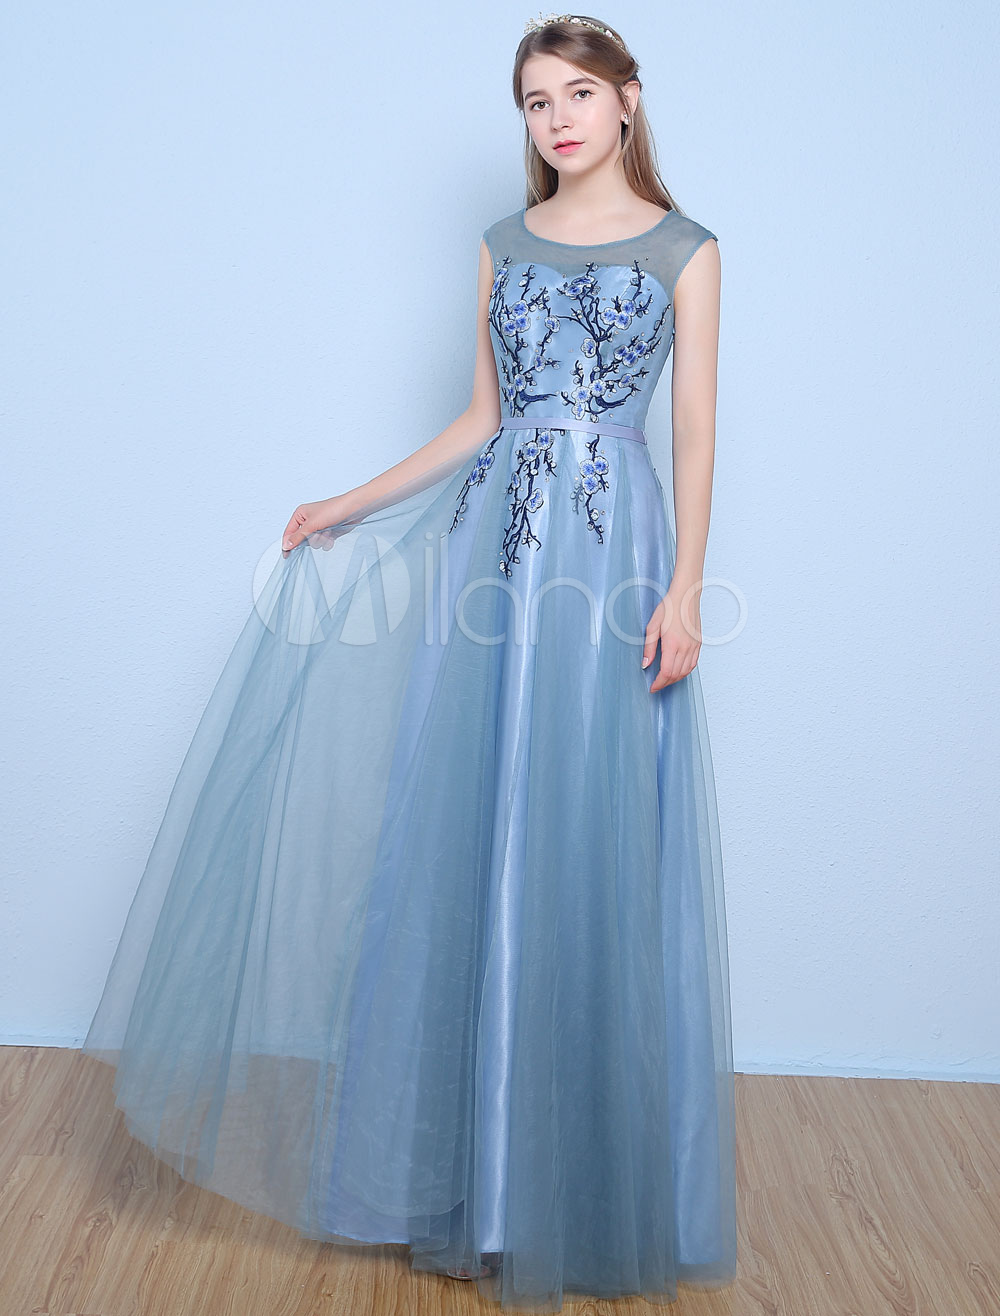 Prom Dresses Long Baby Blue Sleeveless Flowers Embroidered Floor Length Formal Party Dress (Wedding Cheap Party Dress) photo